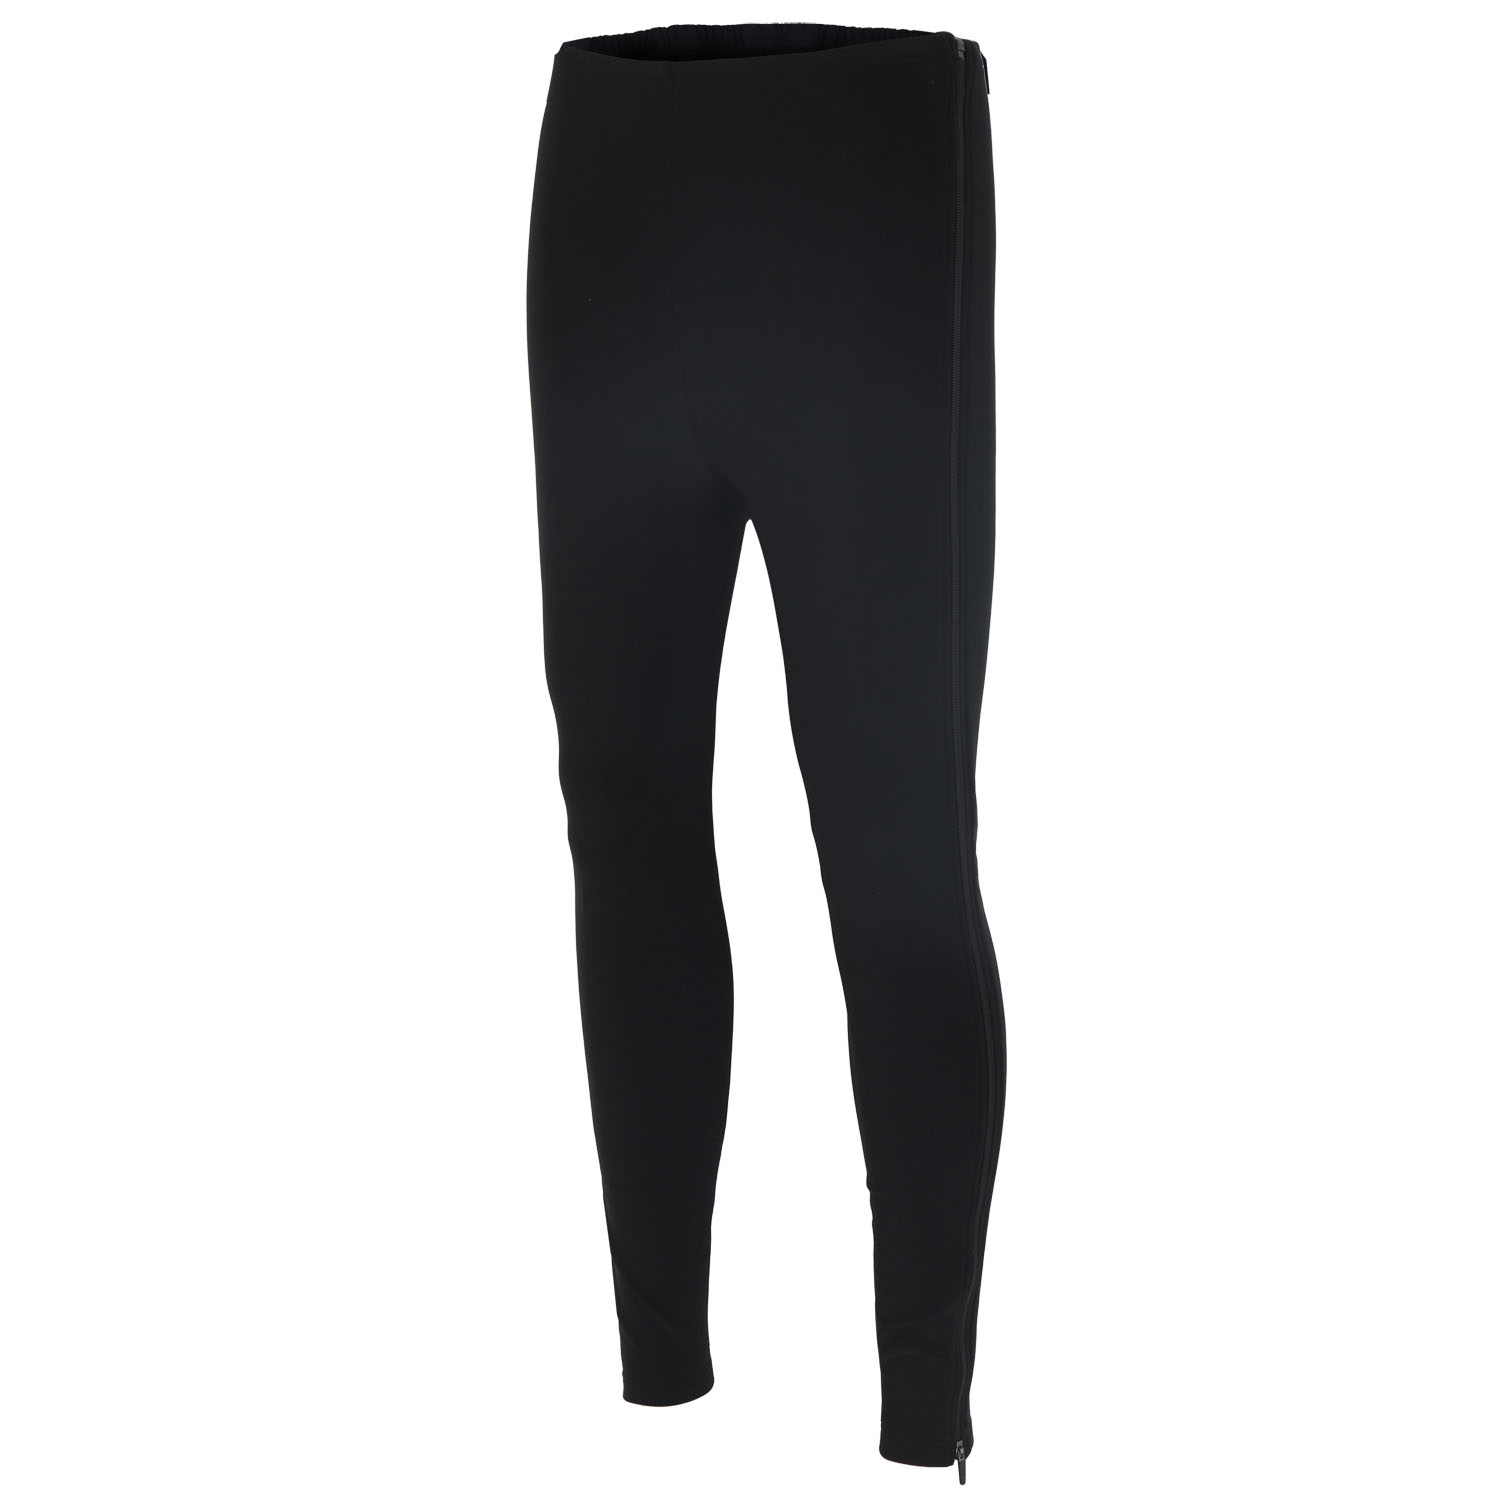 Picture of Bioracer Temp Control Cross Tights - black